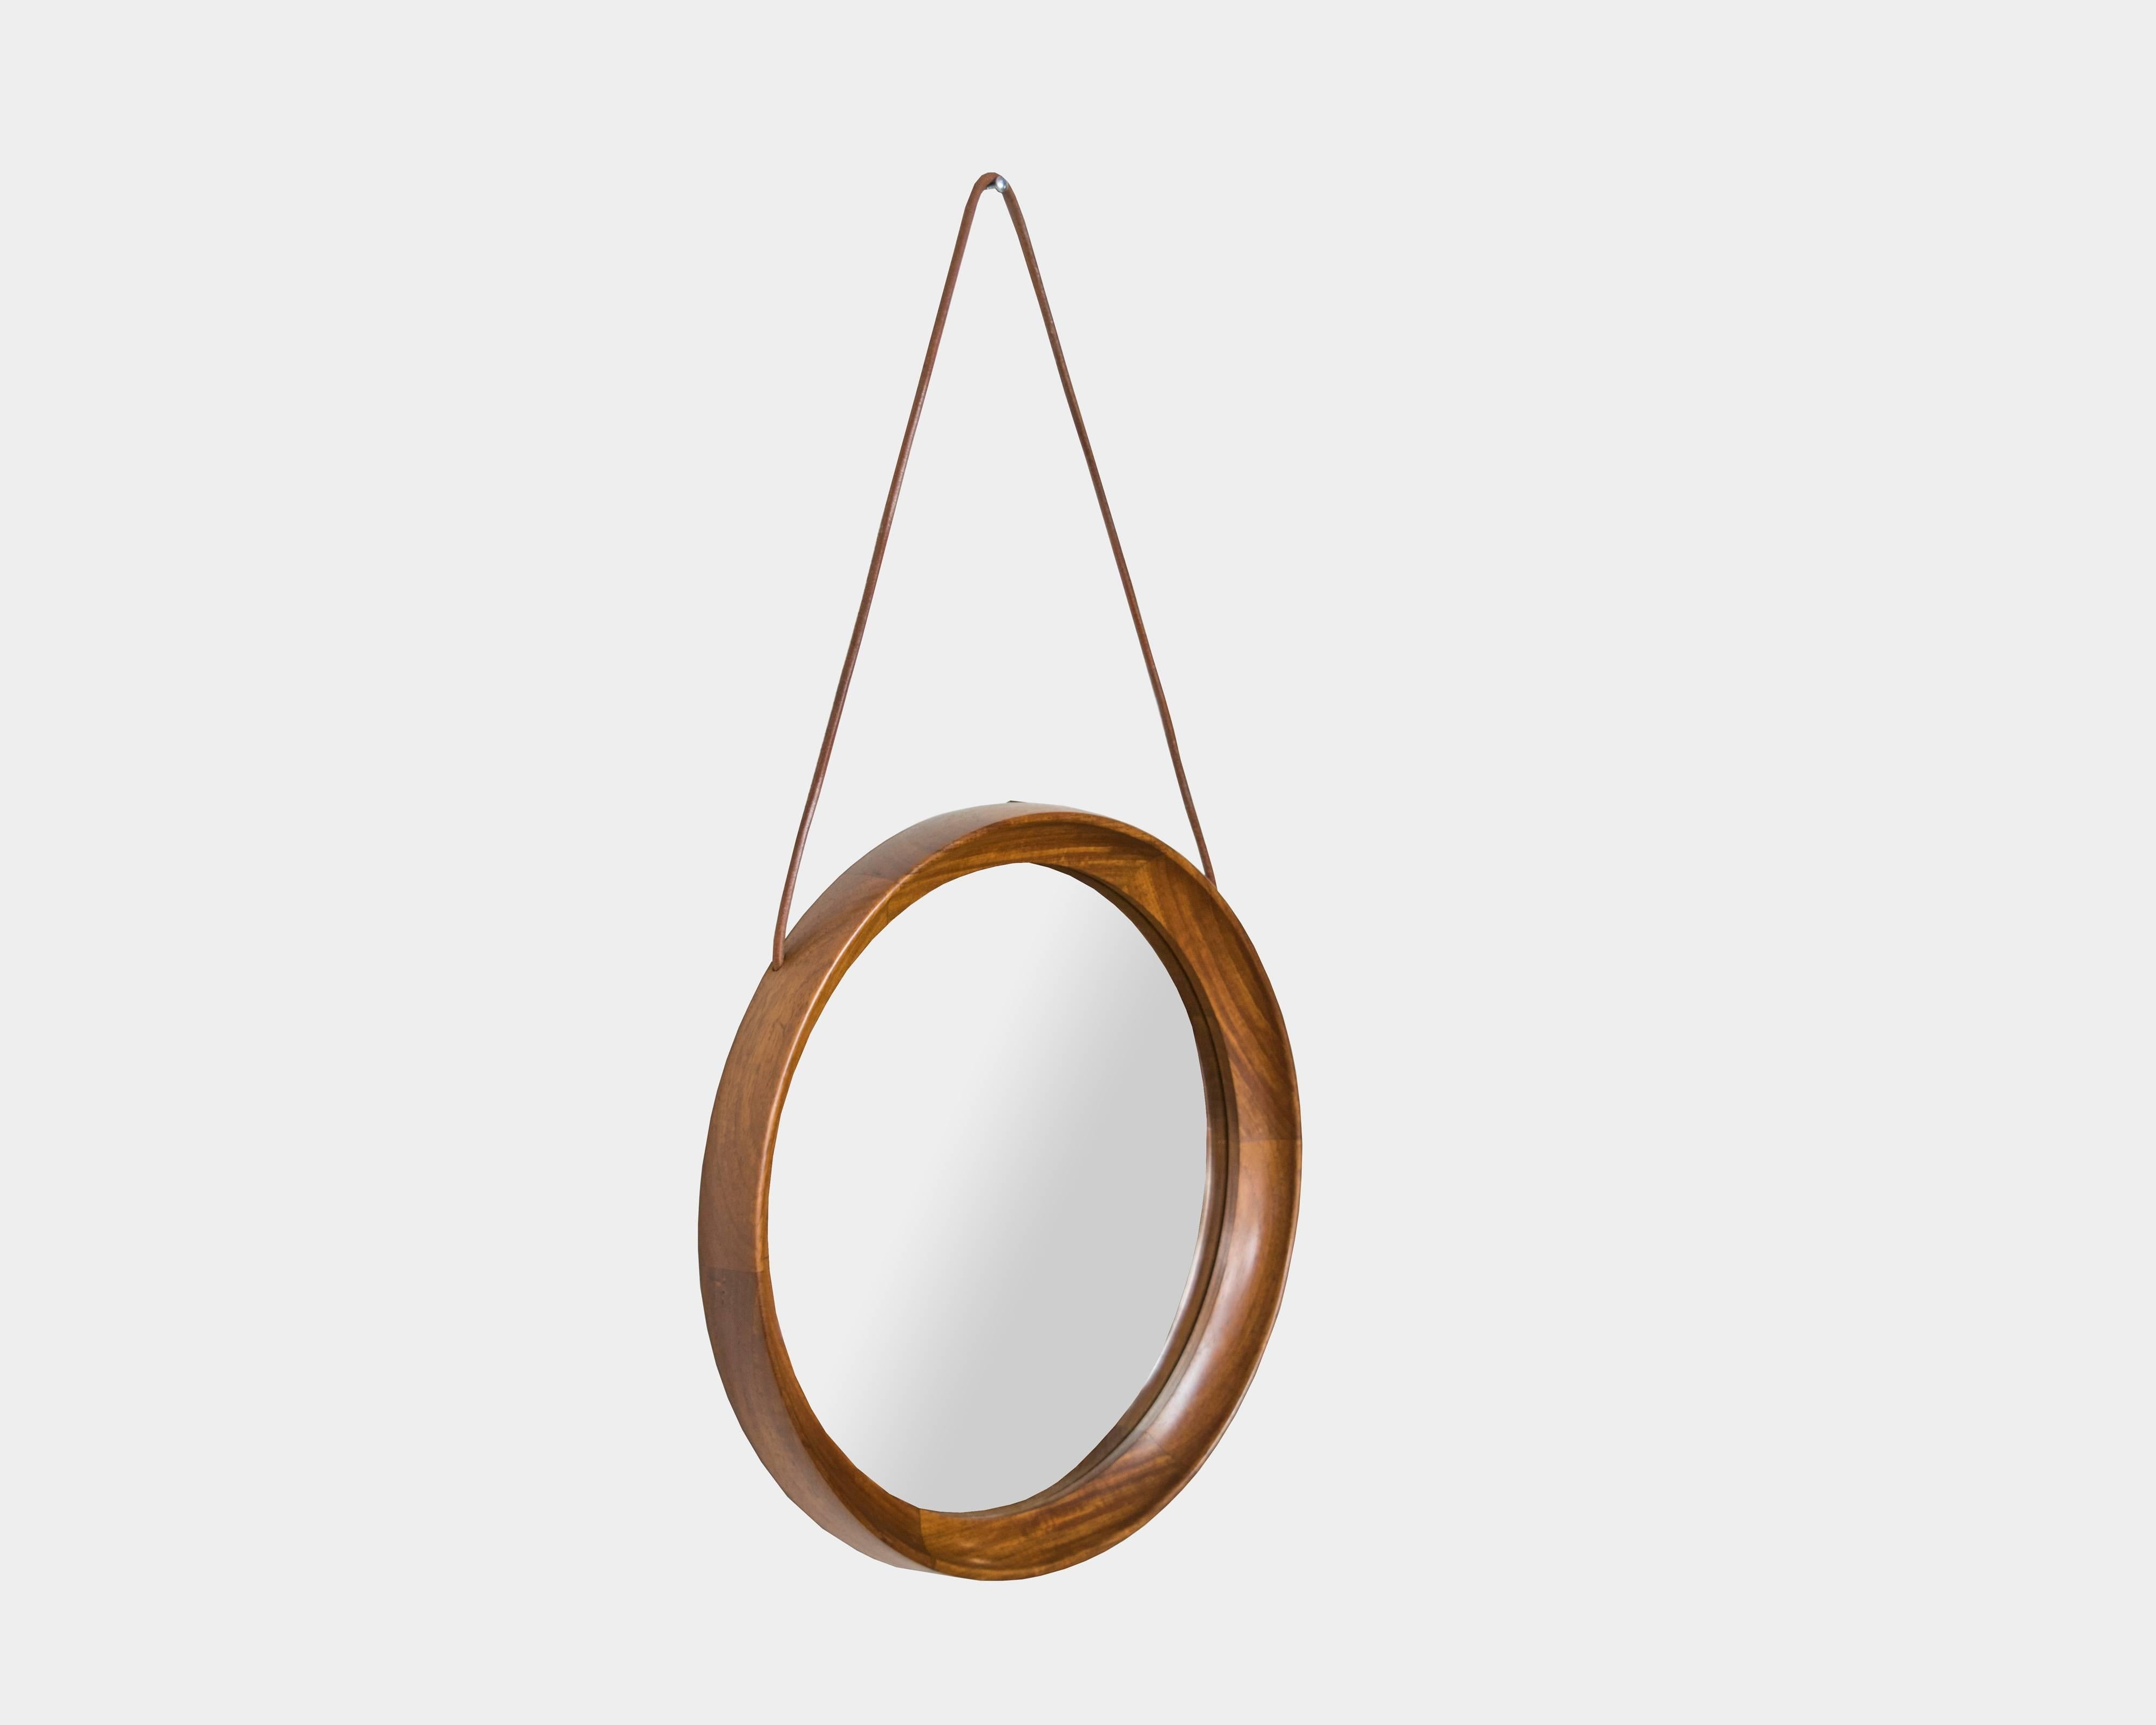 A Mid-Century Modern rosewood round mirror with leather hanging strap.